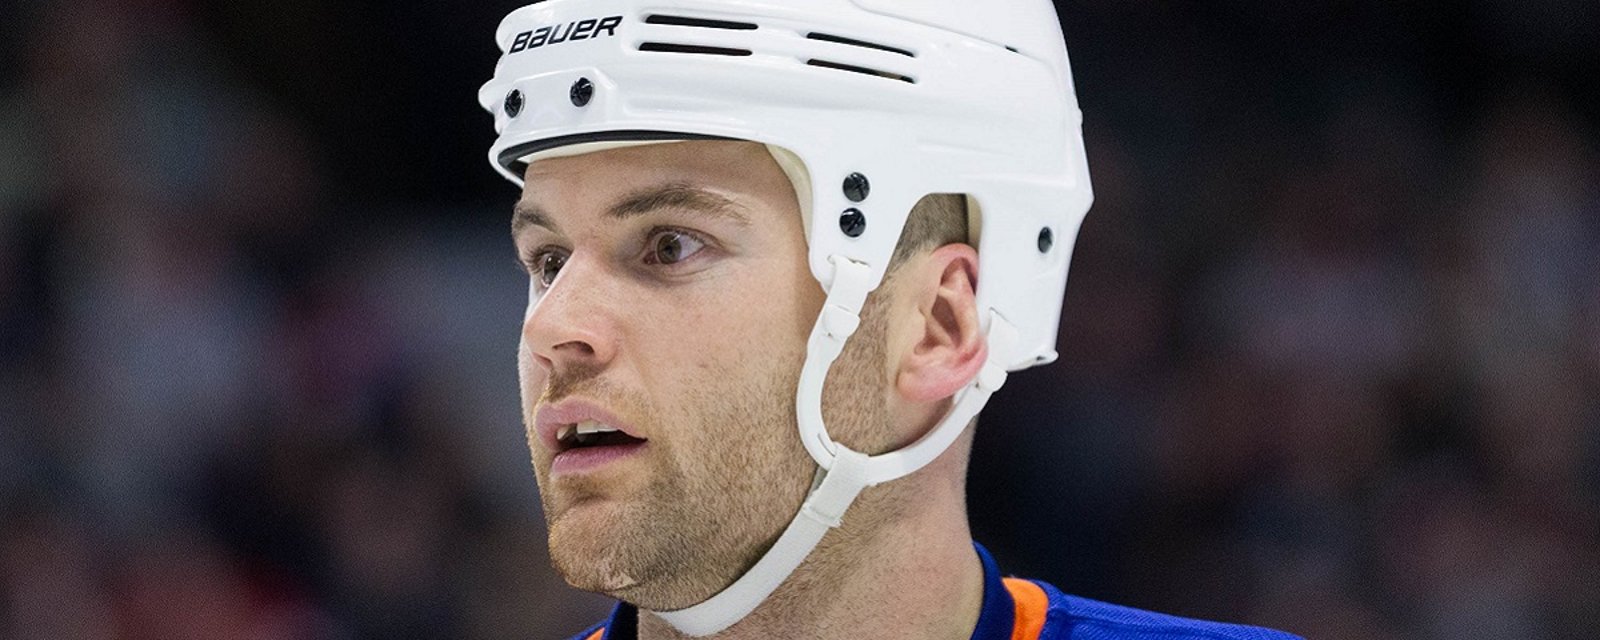 NHL enforcer accused of wishing death on player after injuring him.